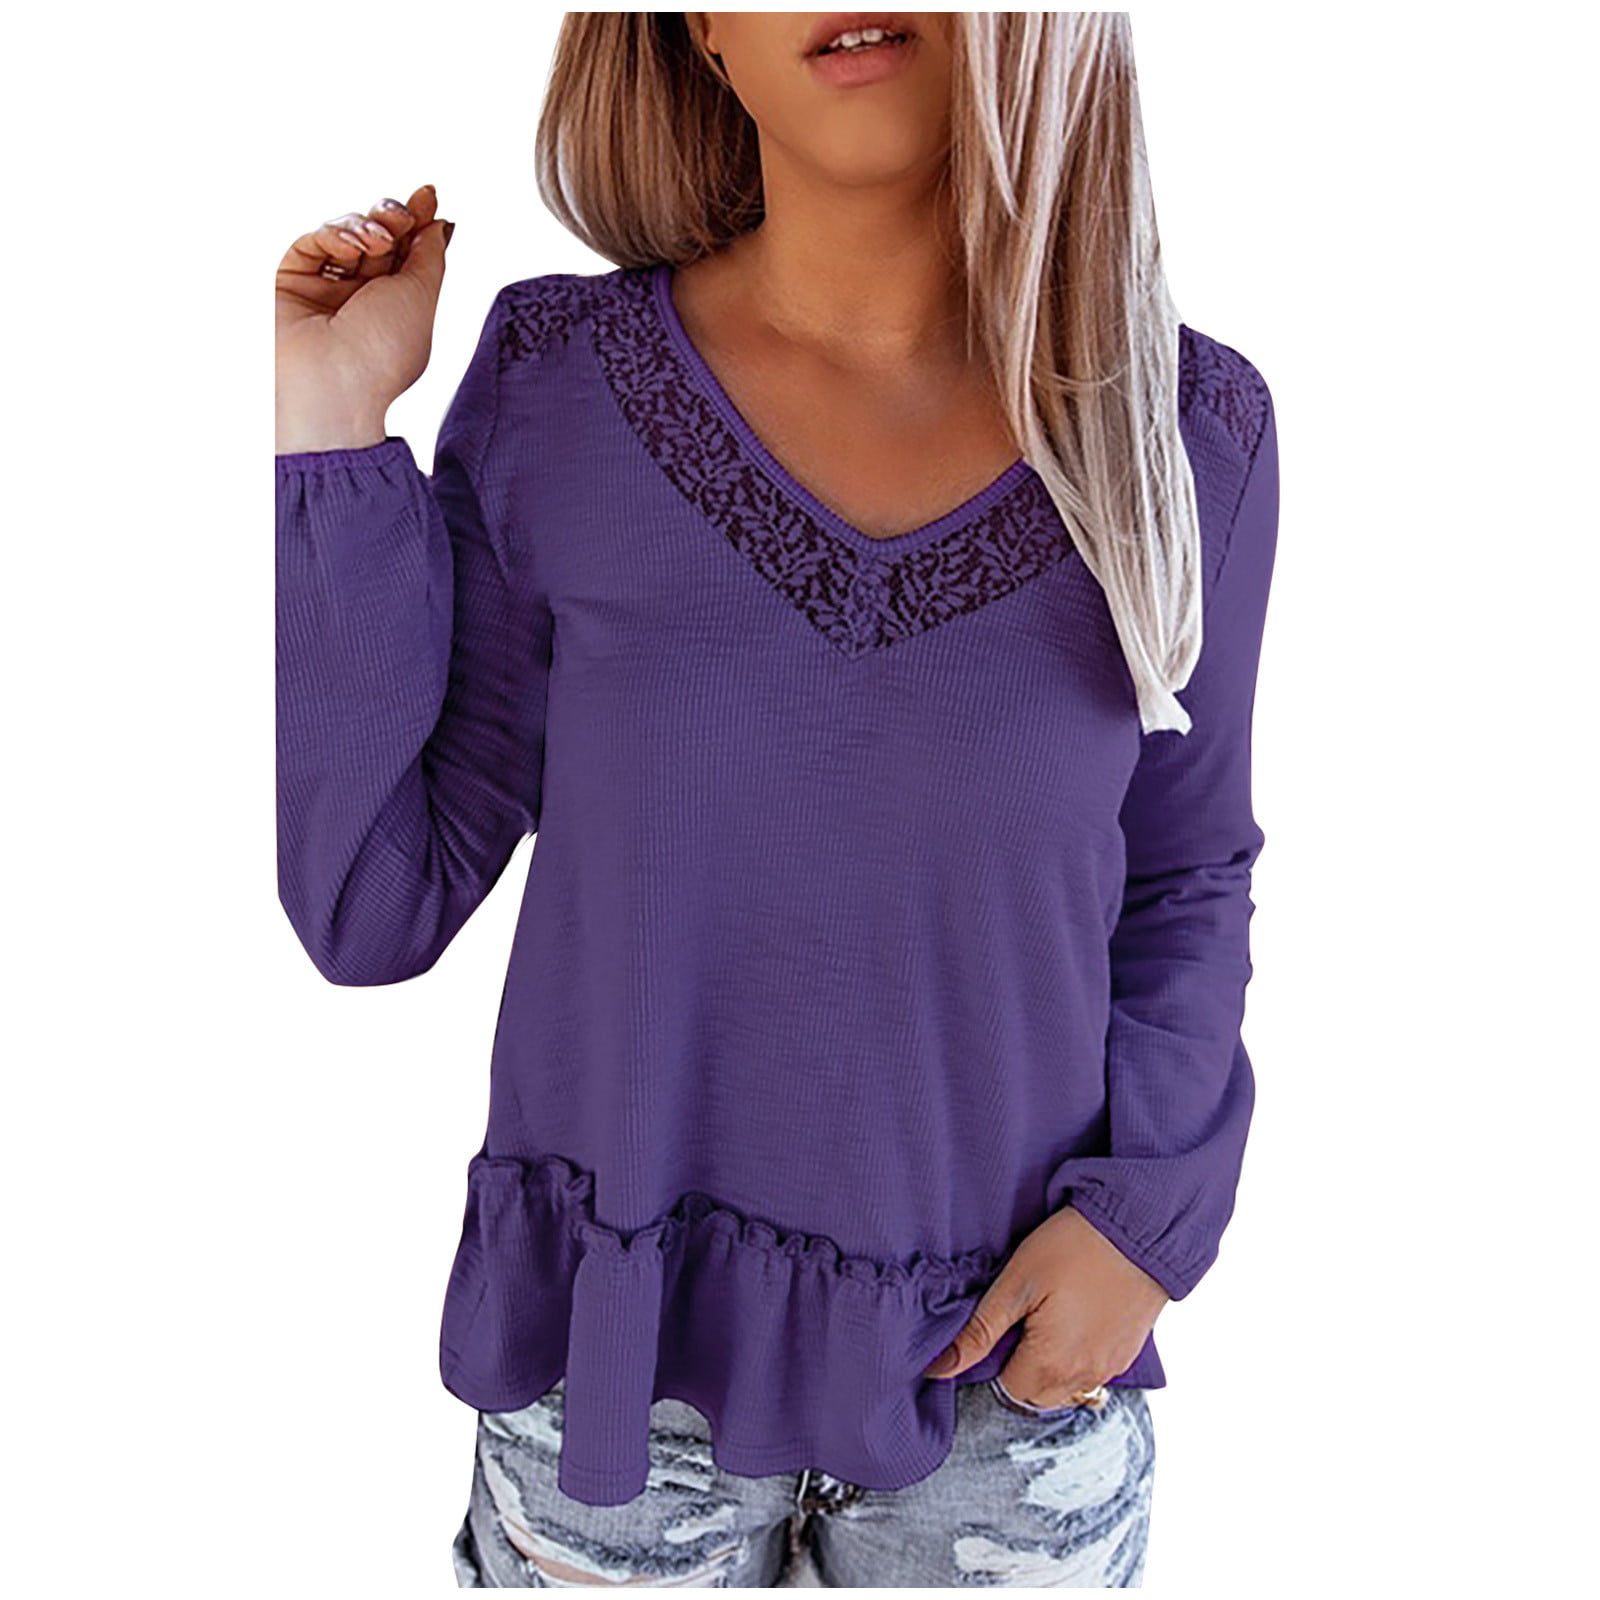 Womens Lace Ruffle Long Sleeve Tops Round Neck T-shirt Casual Pullover Blouse 